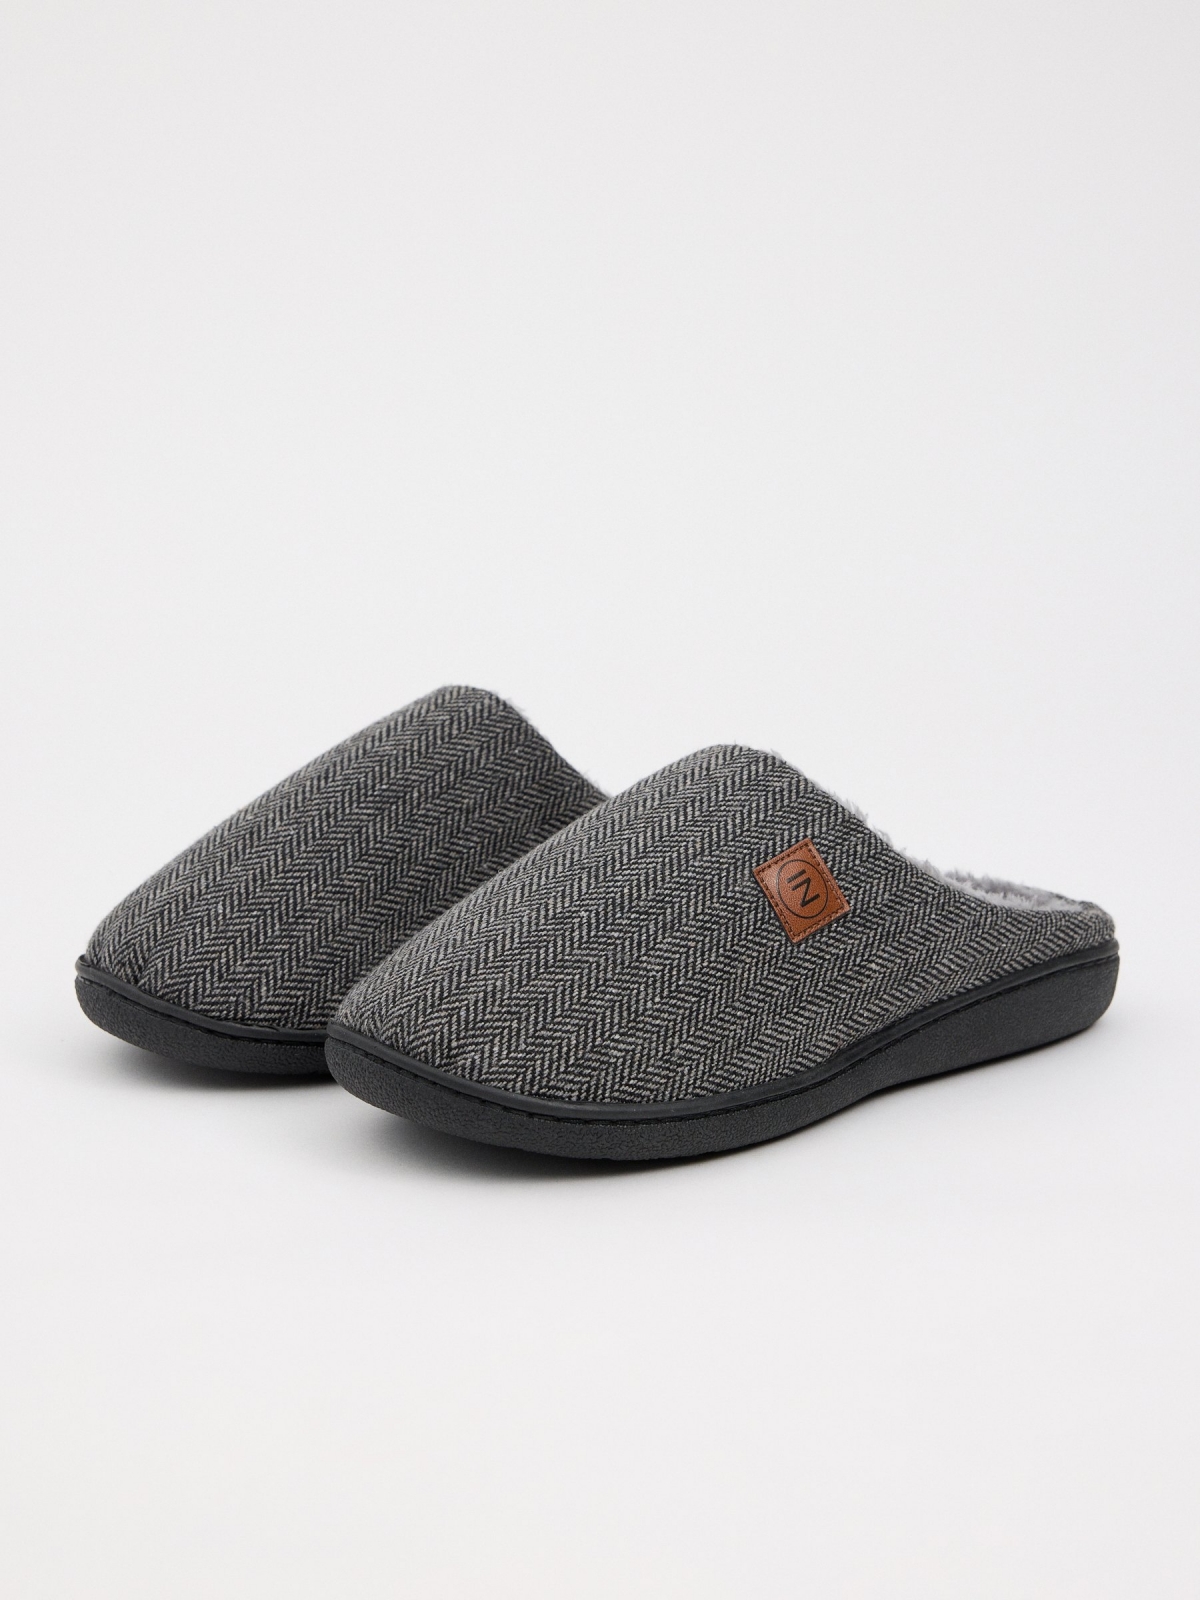 Fur lined house slippers dark grey middle back view